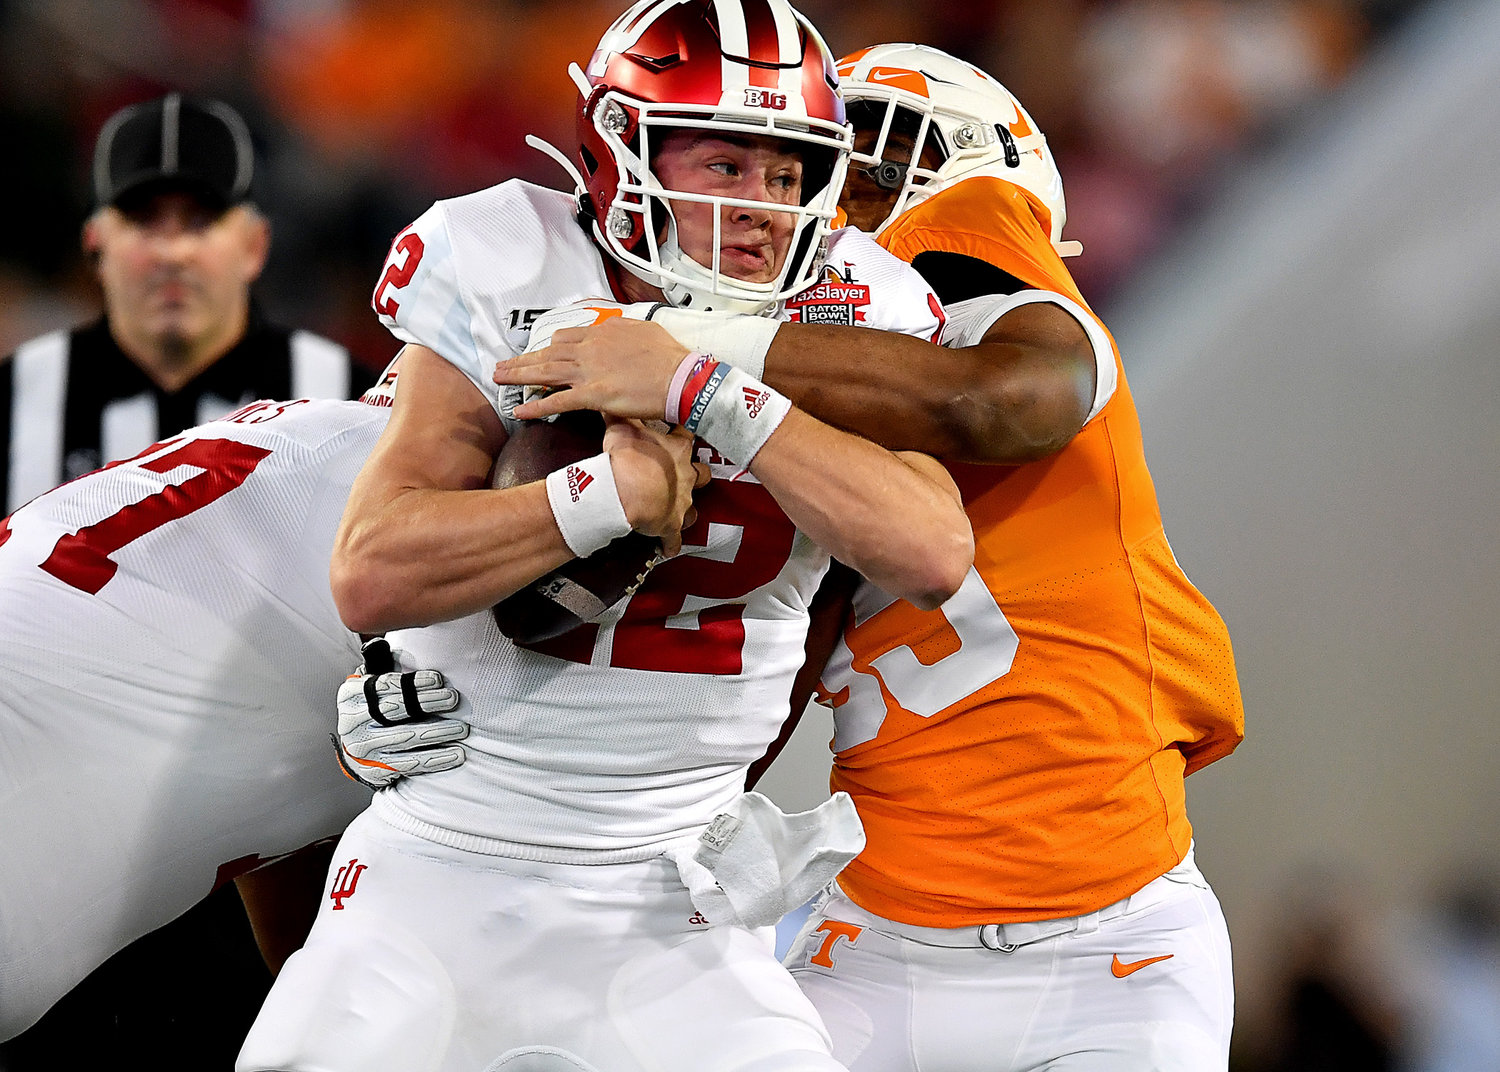 Indiana Hoosiers quarterback Peyton Ramsey (12) prepares himself to be sacked in the first half of the Gator Bowl NCAA football game against the Tennessee Volunteers Thursday, January 2, 2020, at TIAA Bank Field in Jacksonville, Fla.